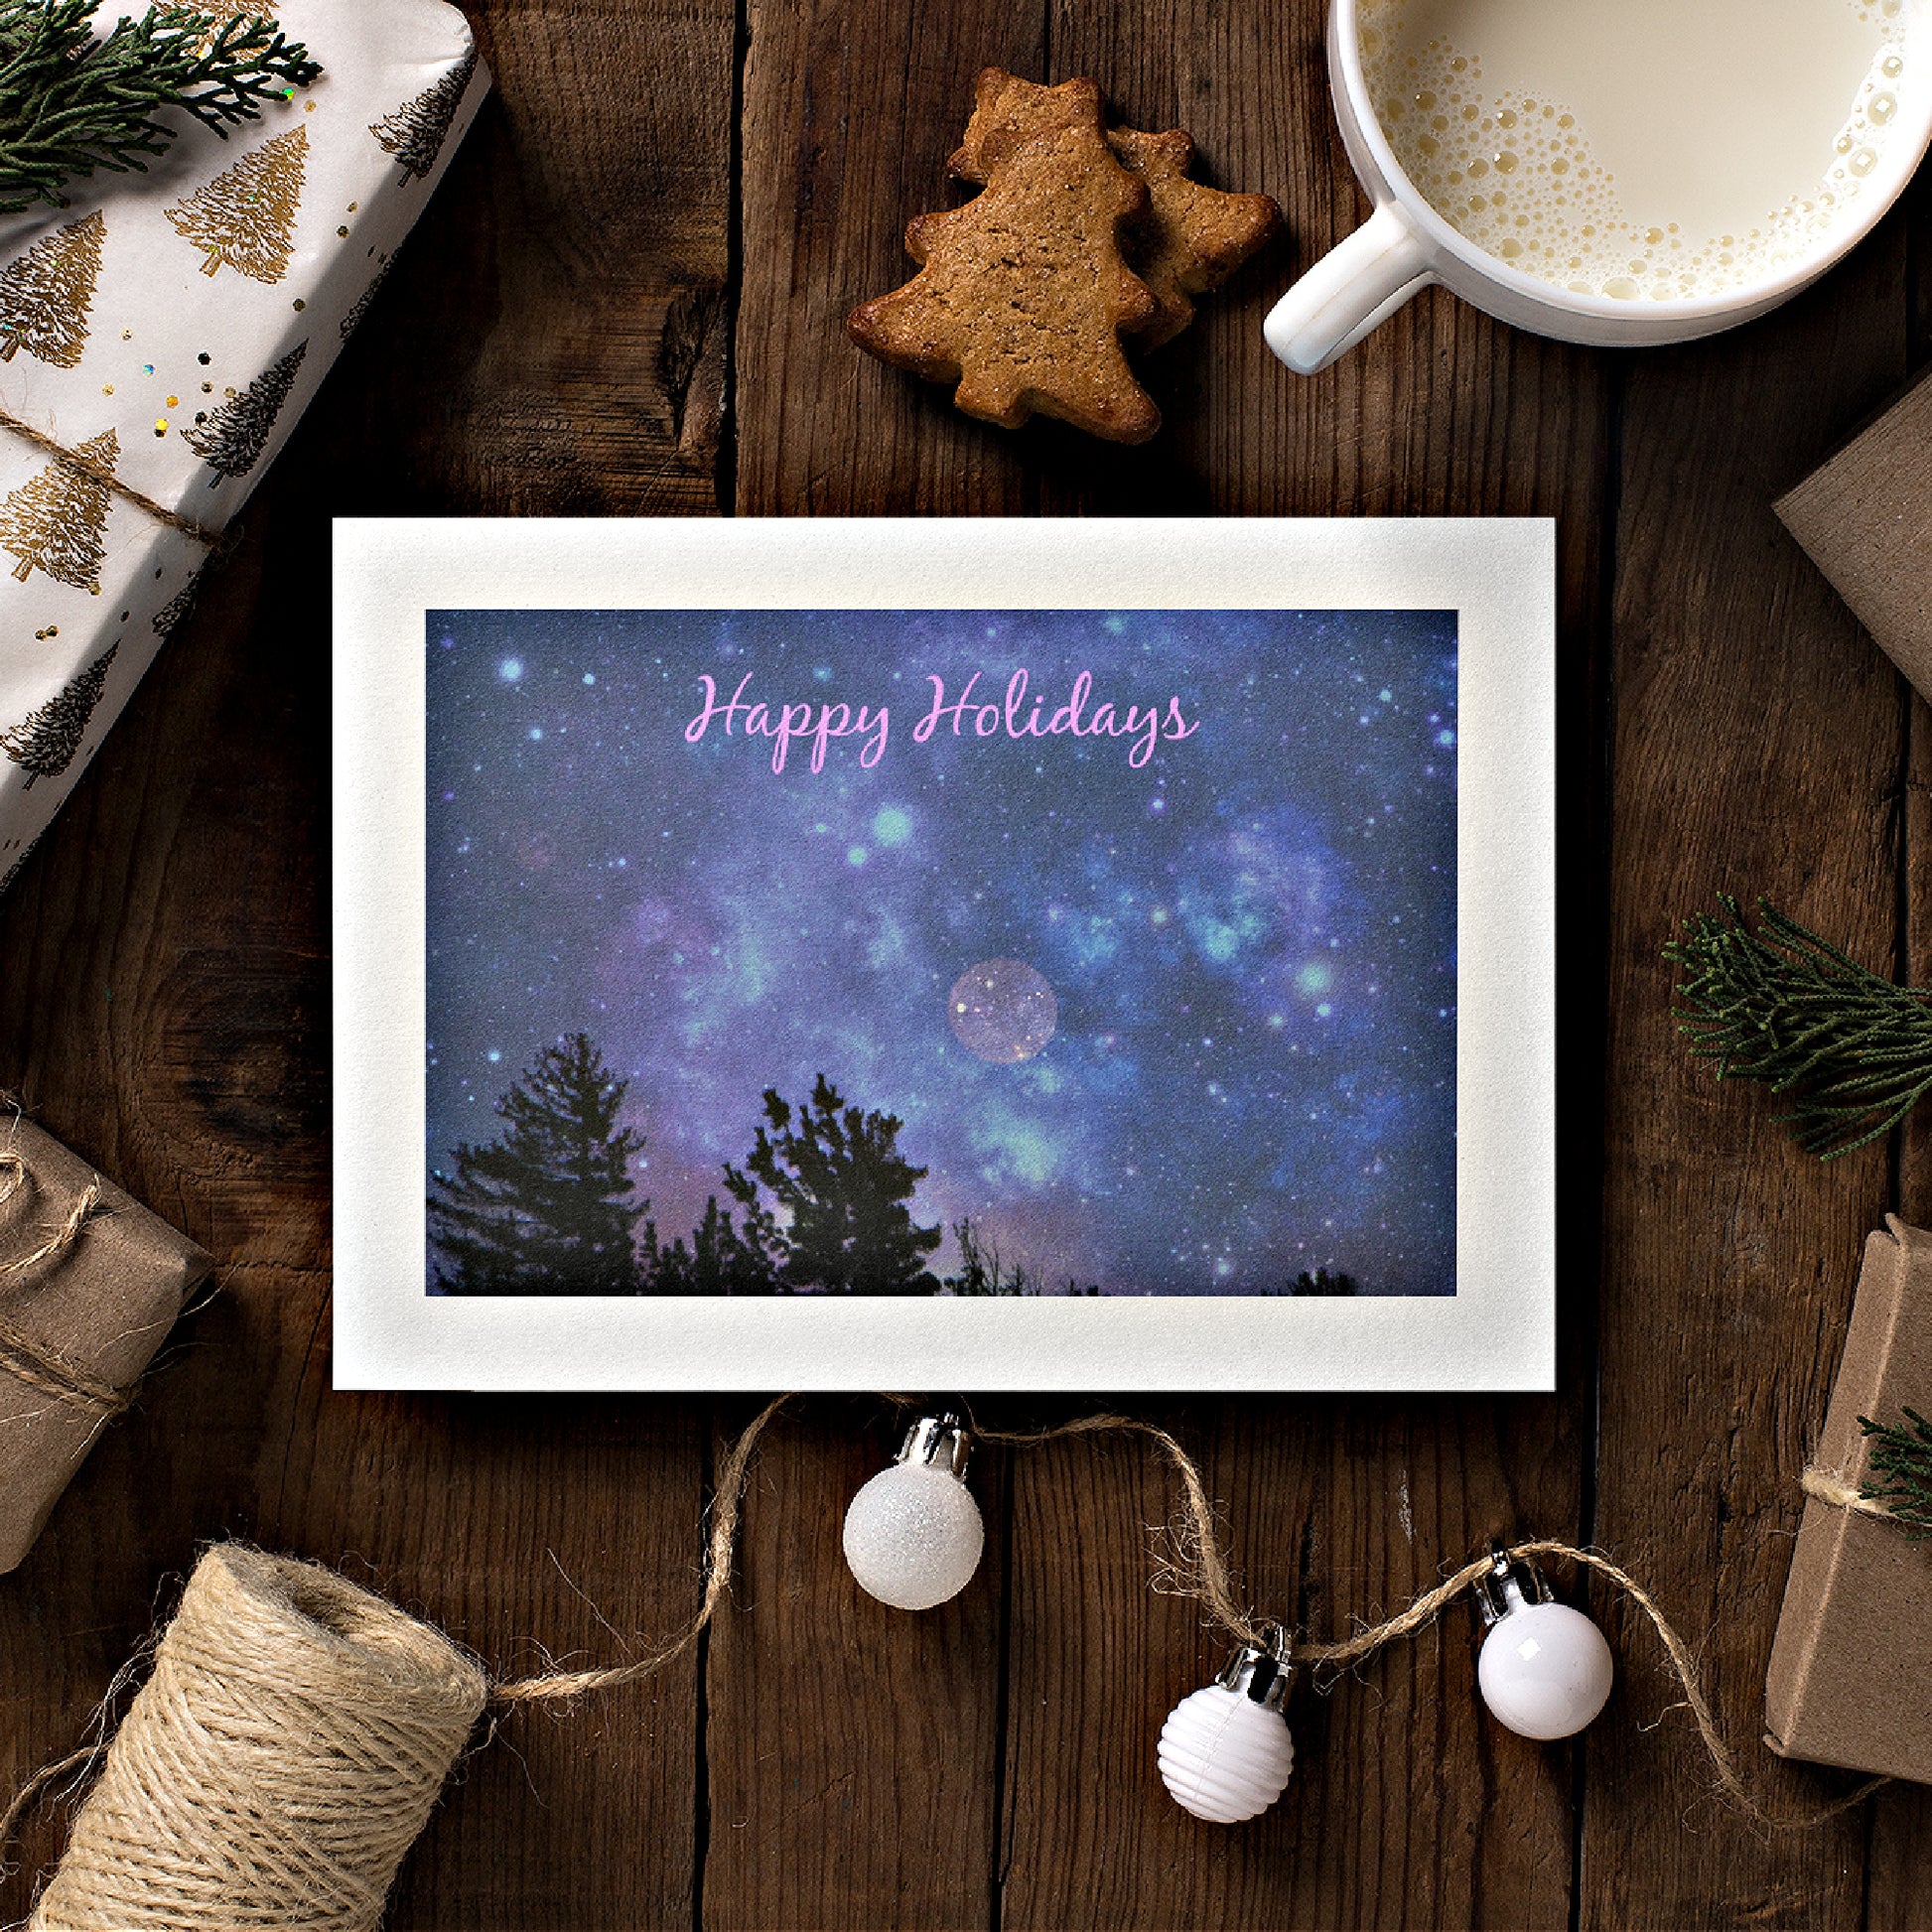 A mock up of our Happy Holidays Card featuring a full moon in a night sky and pink text